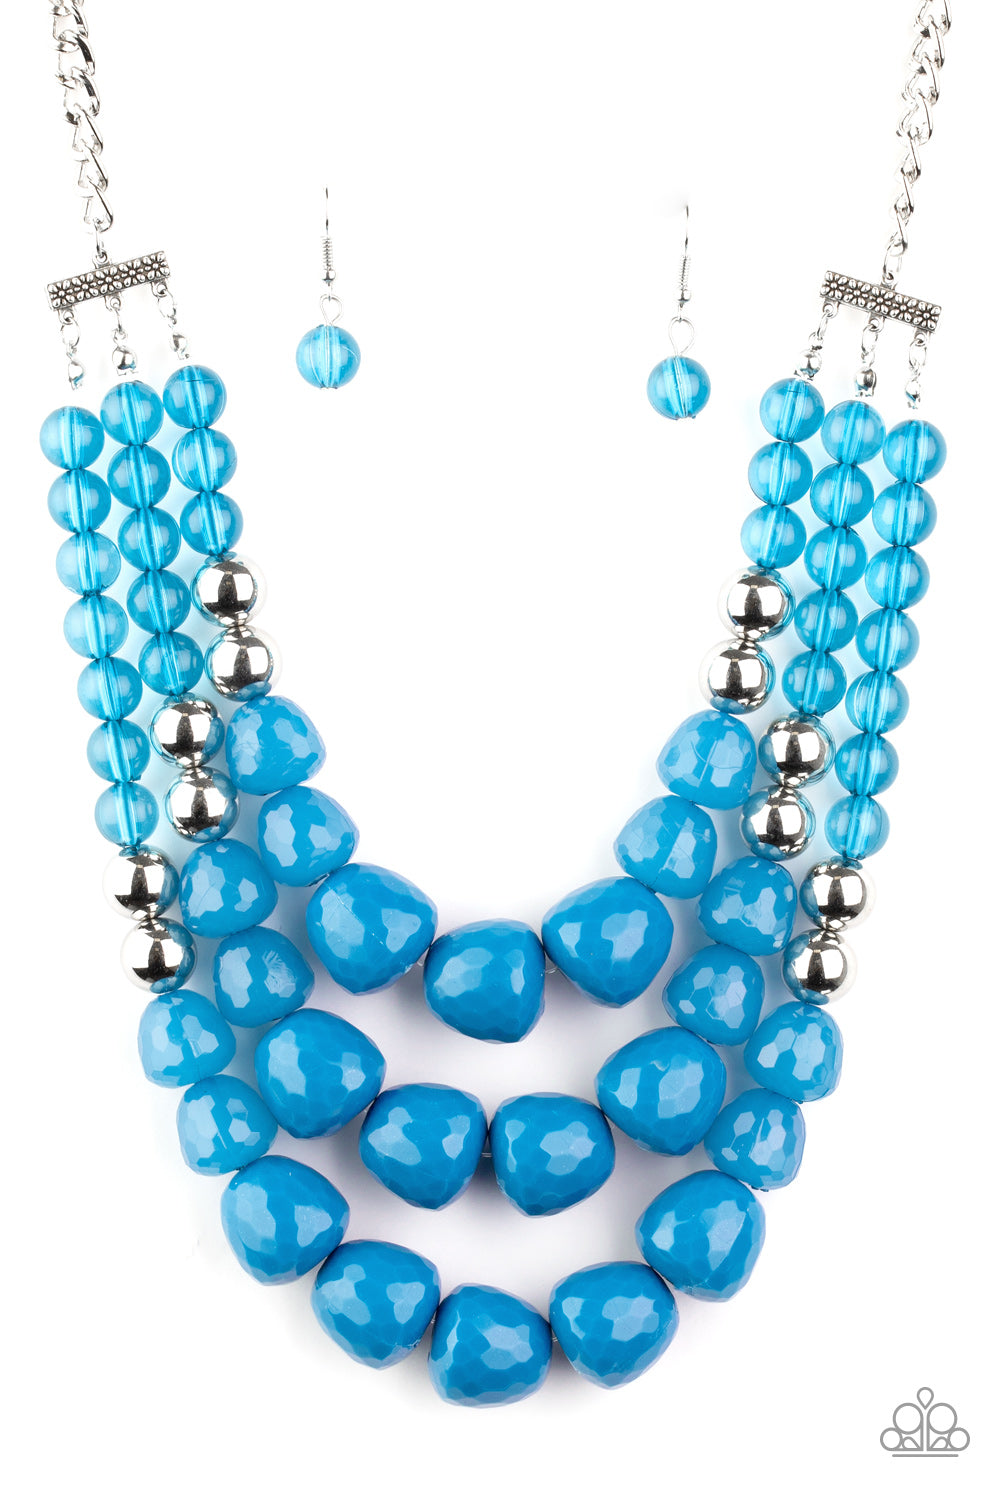 Paparazzi Forbidden Fruit - Blue Necklace - A Finishing Touch Jewelry